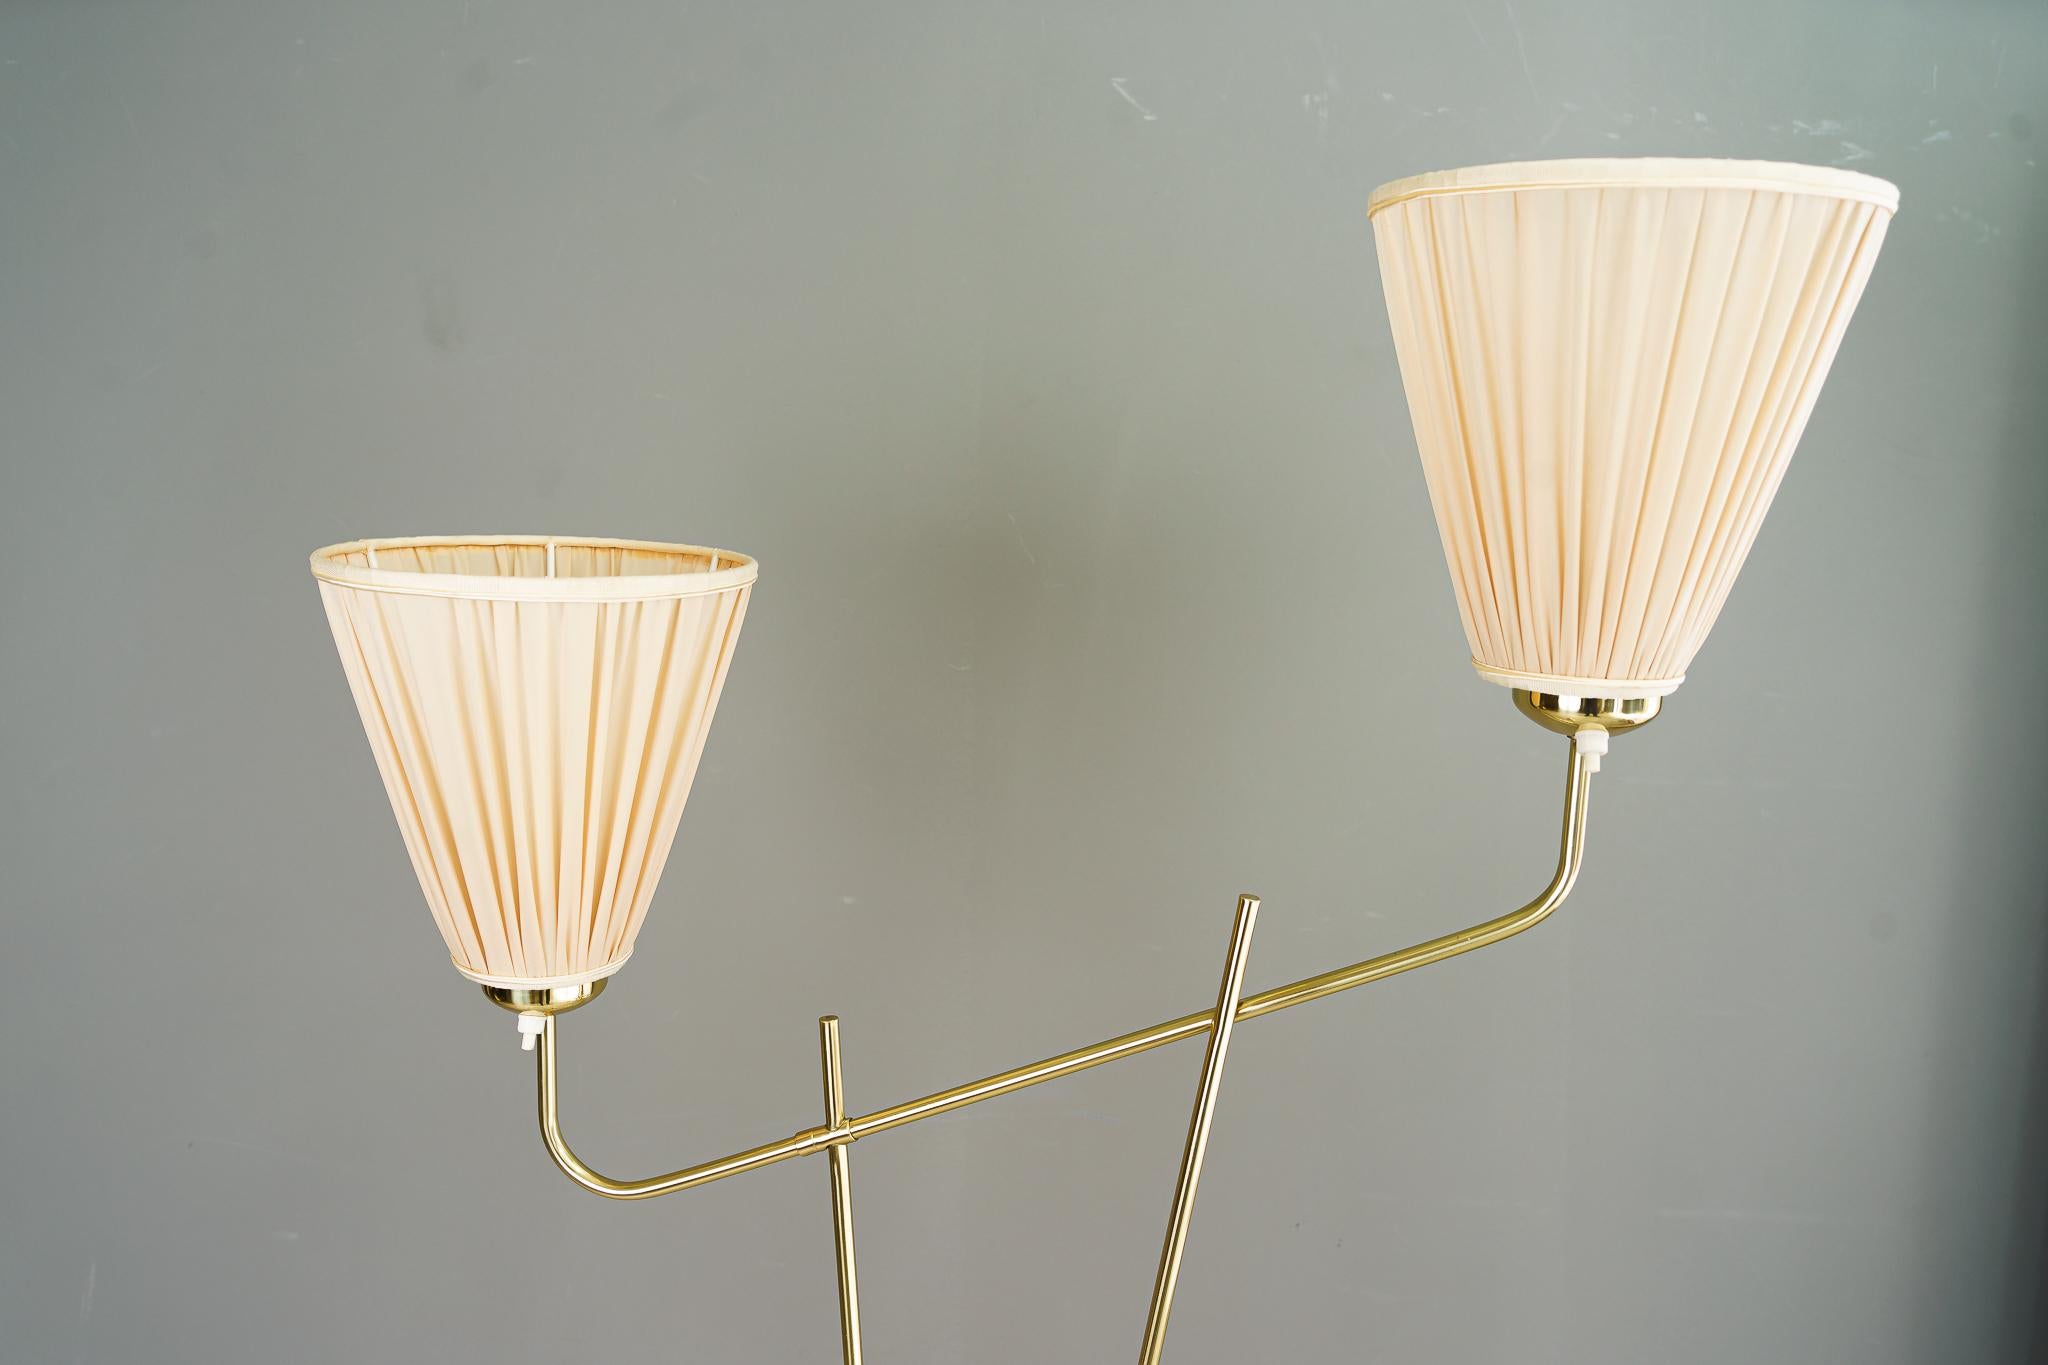 Rupert nikoll floor lamp vienna around 1950s with fabric shades
Brass polished and stove enameled
it is possible to turn on the shades separatly
The shades are replaced ( new ).